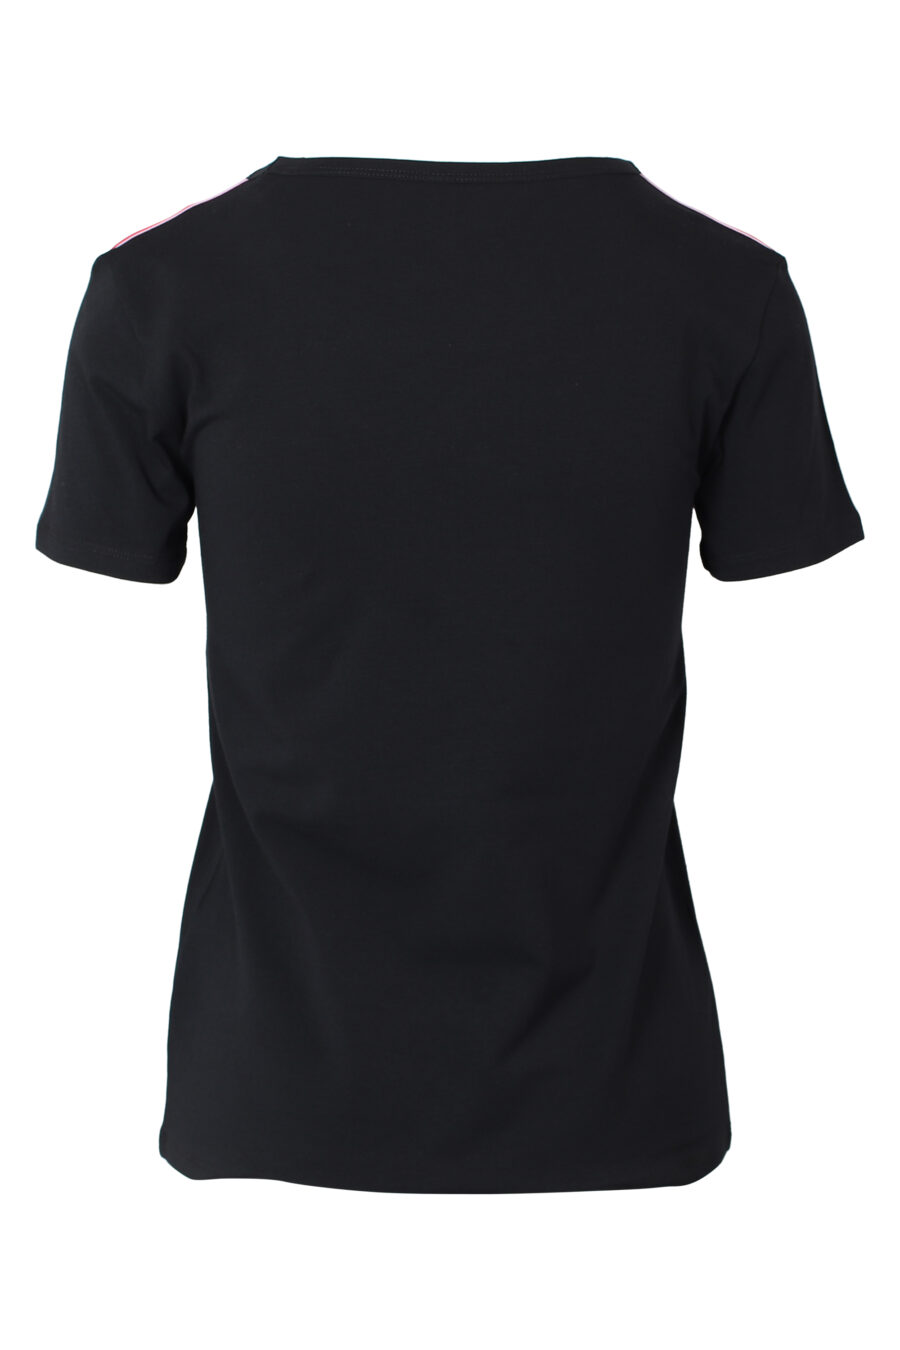 Black slim fit T-shirt with logo tape on shoulders - IMG 9821